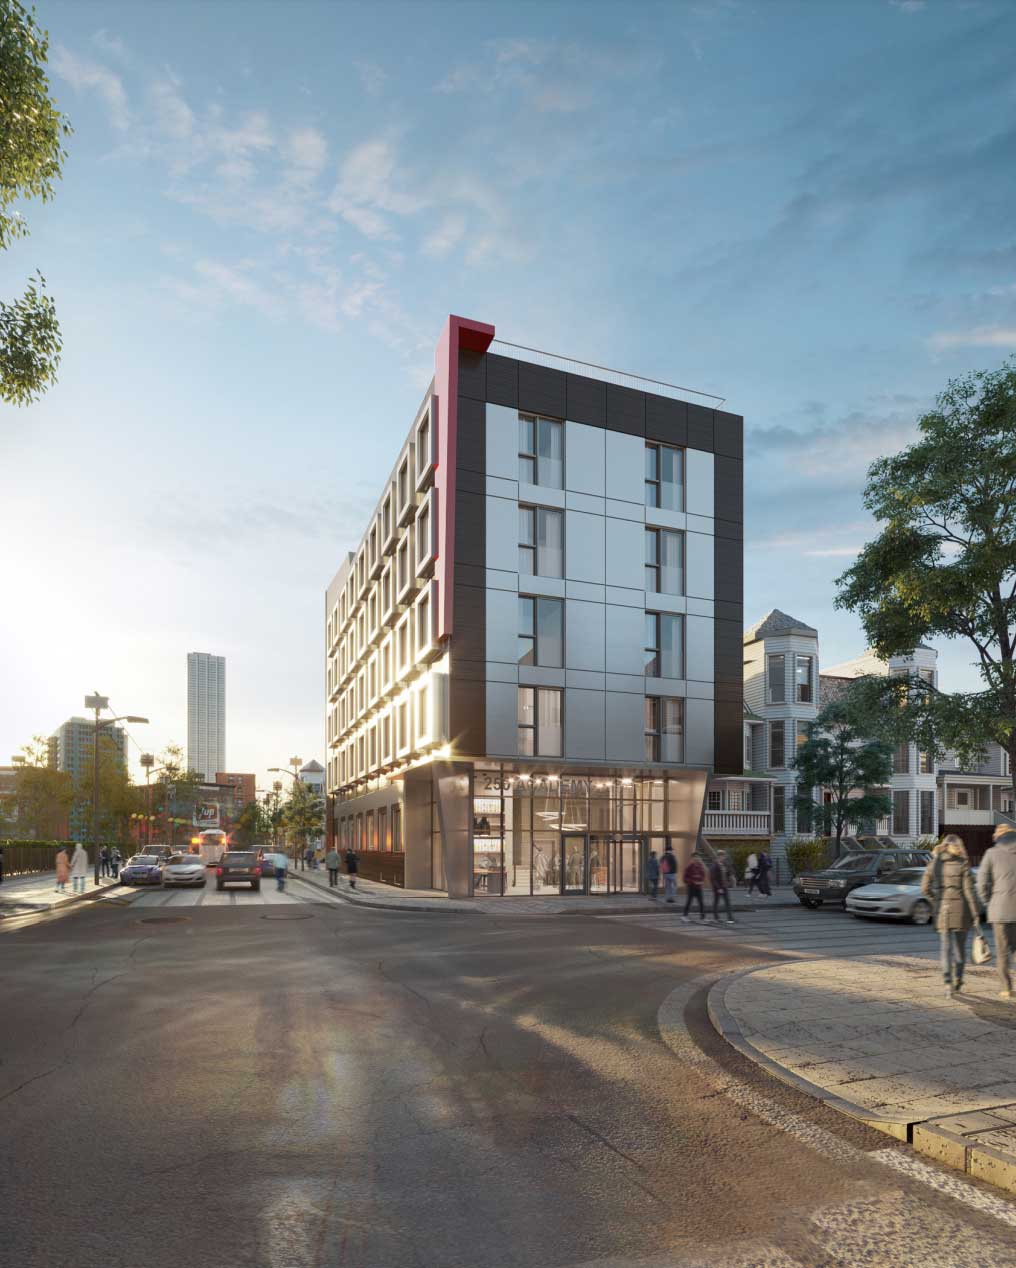 Journal Square Jersey City Hotel Planned Academy Tuers